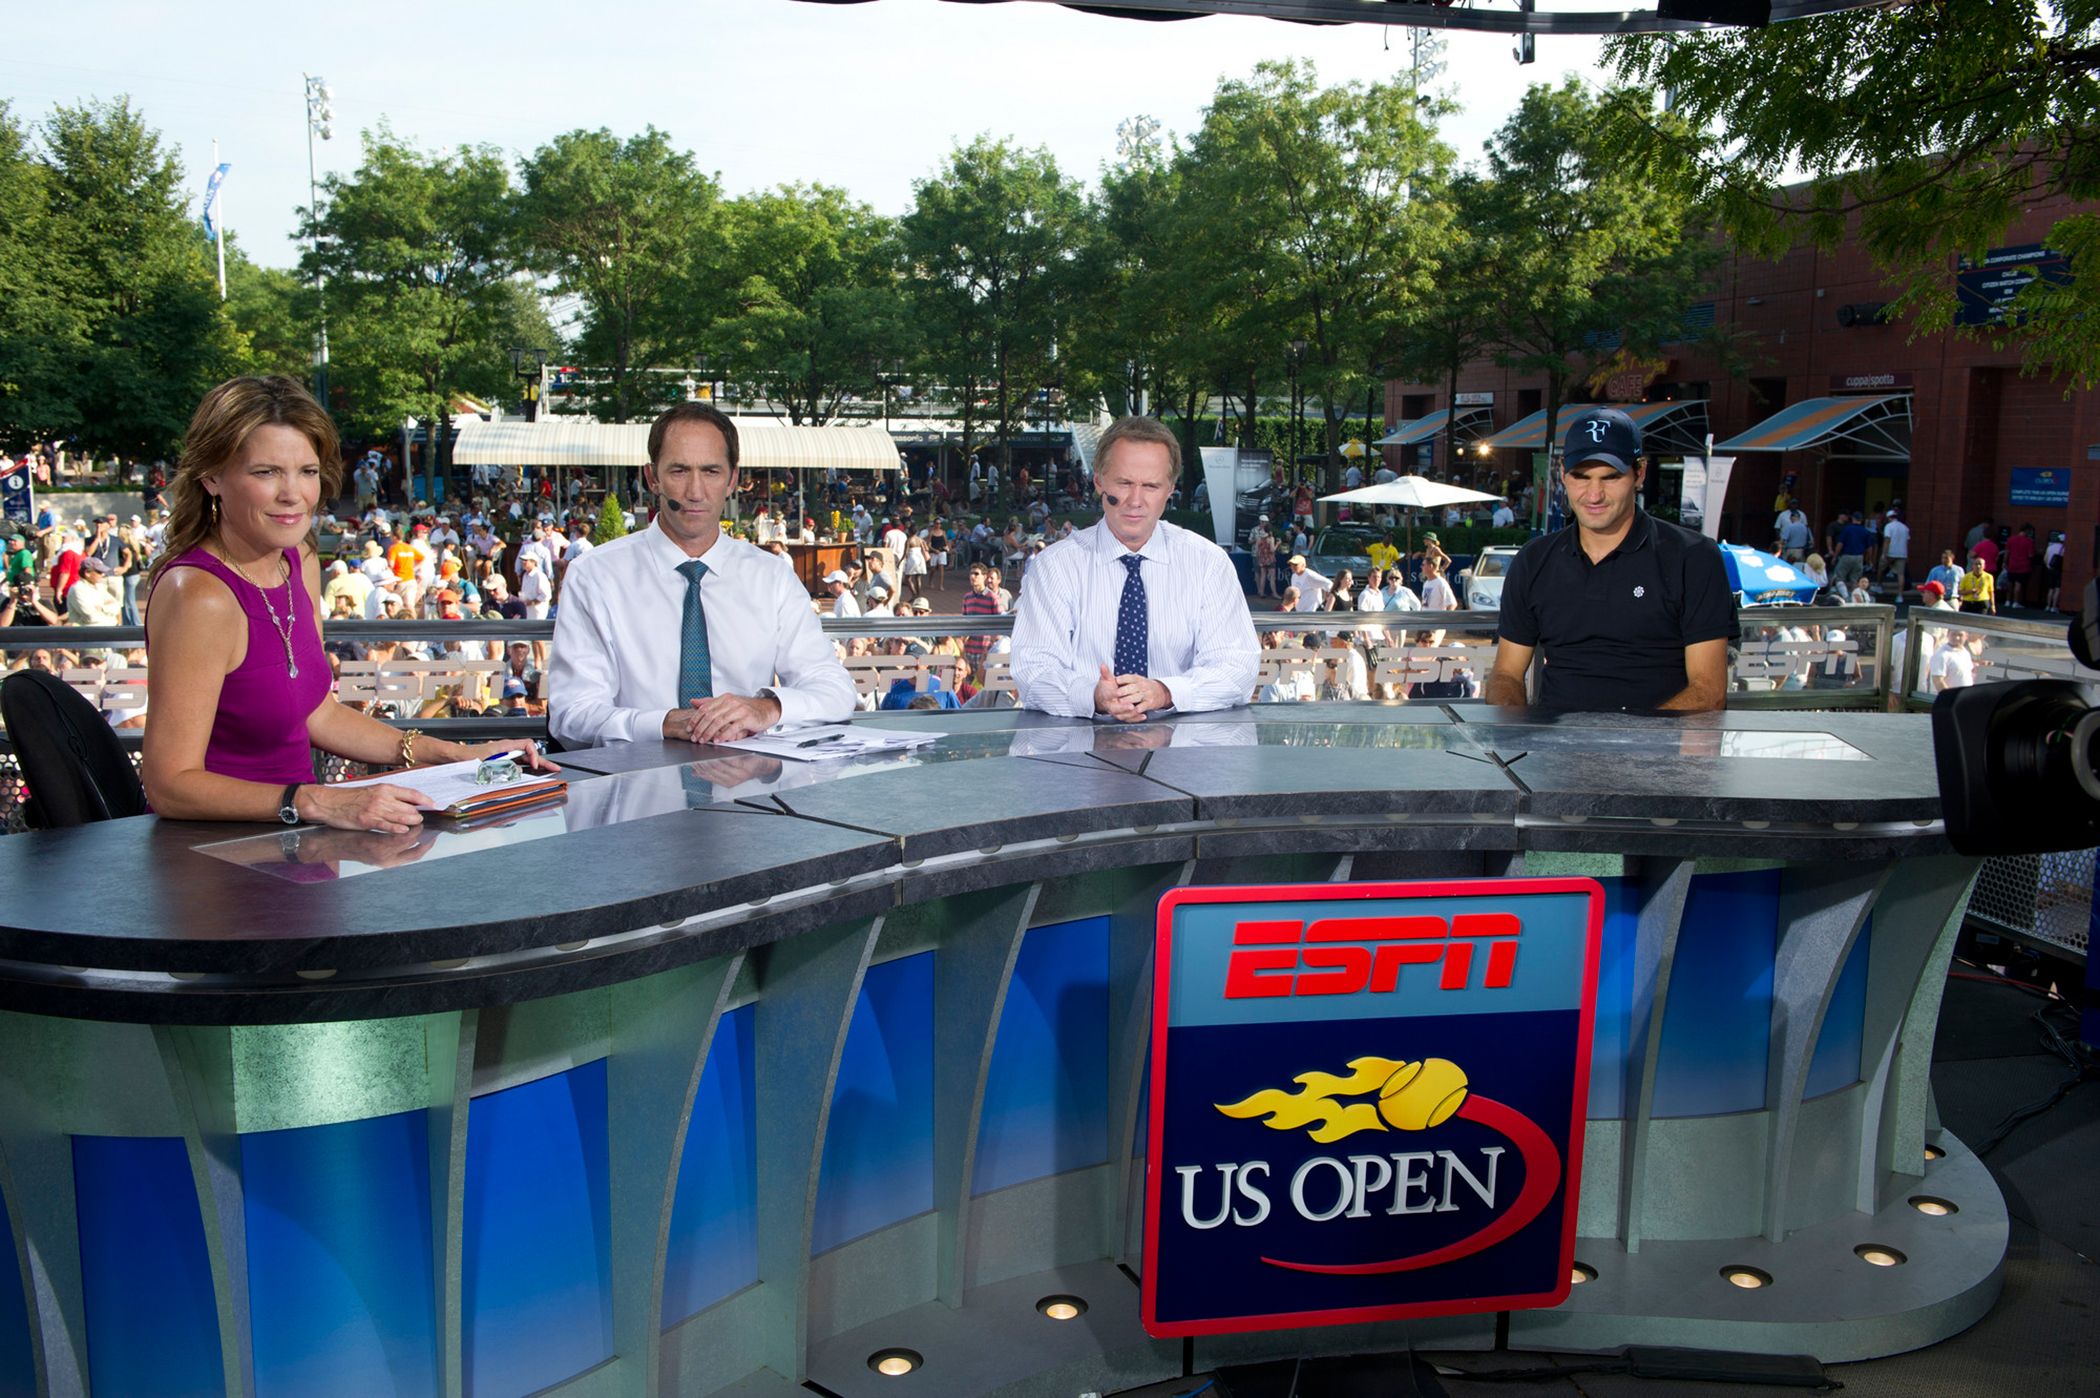 ESPN host Hannah Storm, tennis analysts Darren Cahill and Patrick McEnroe with guest Roger Federer of Switzerland on the on-site set for the US Open Tennis Championships at the USTA Billie Jean King National Tennis Center, 2010.